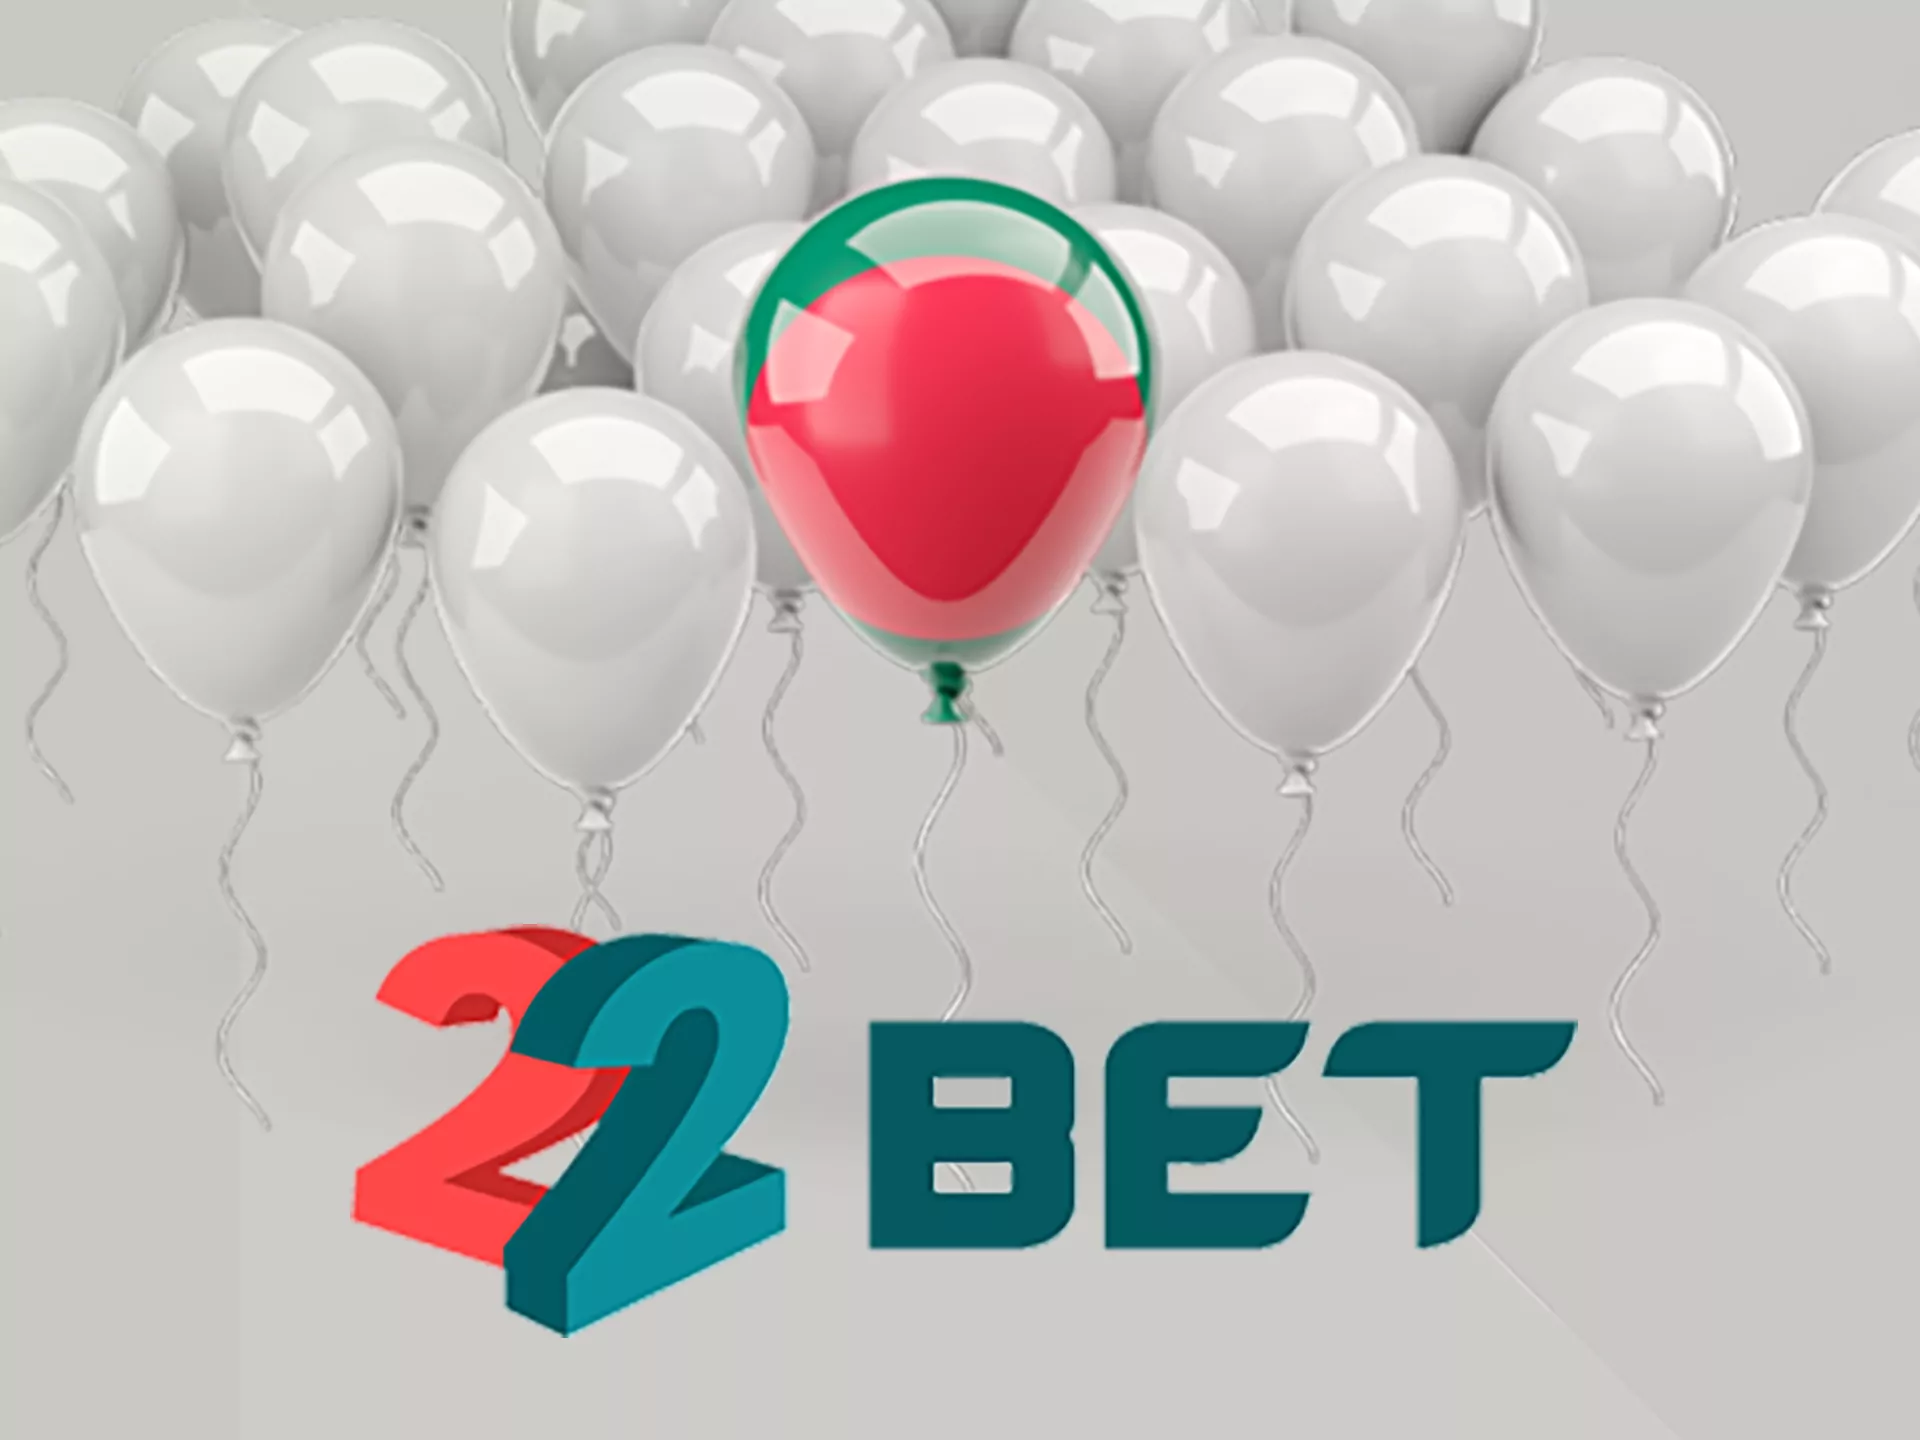 You will find the best bonuses on 22bet website.